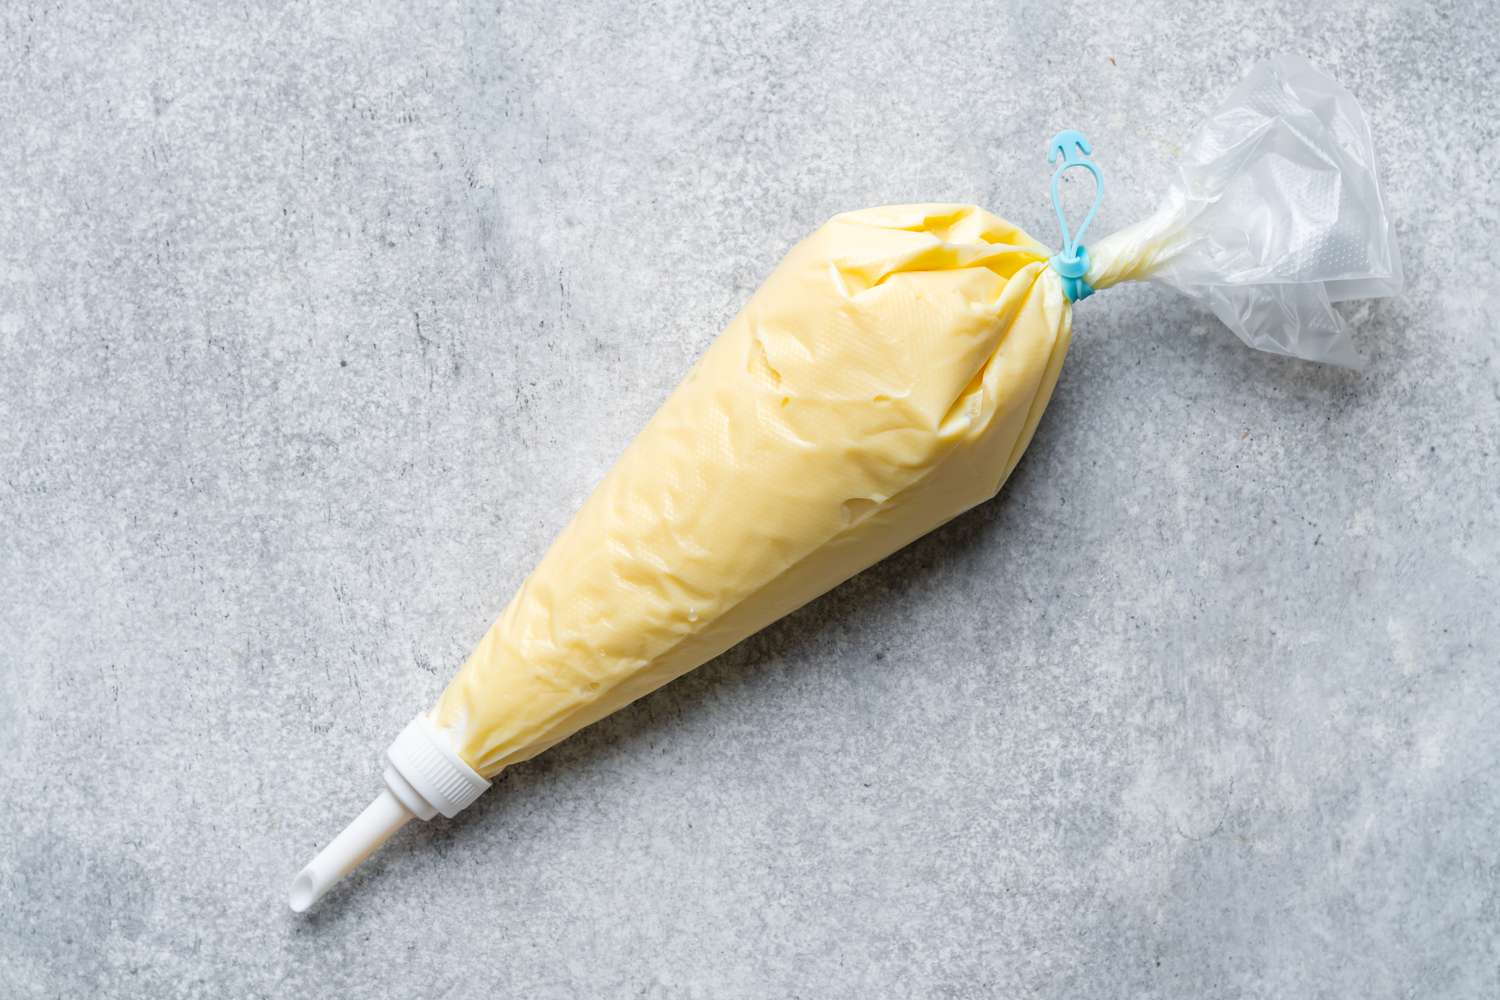 Pastry cream in a piping bag